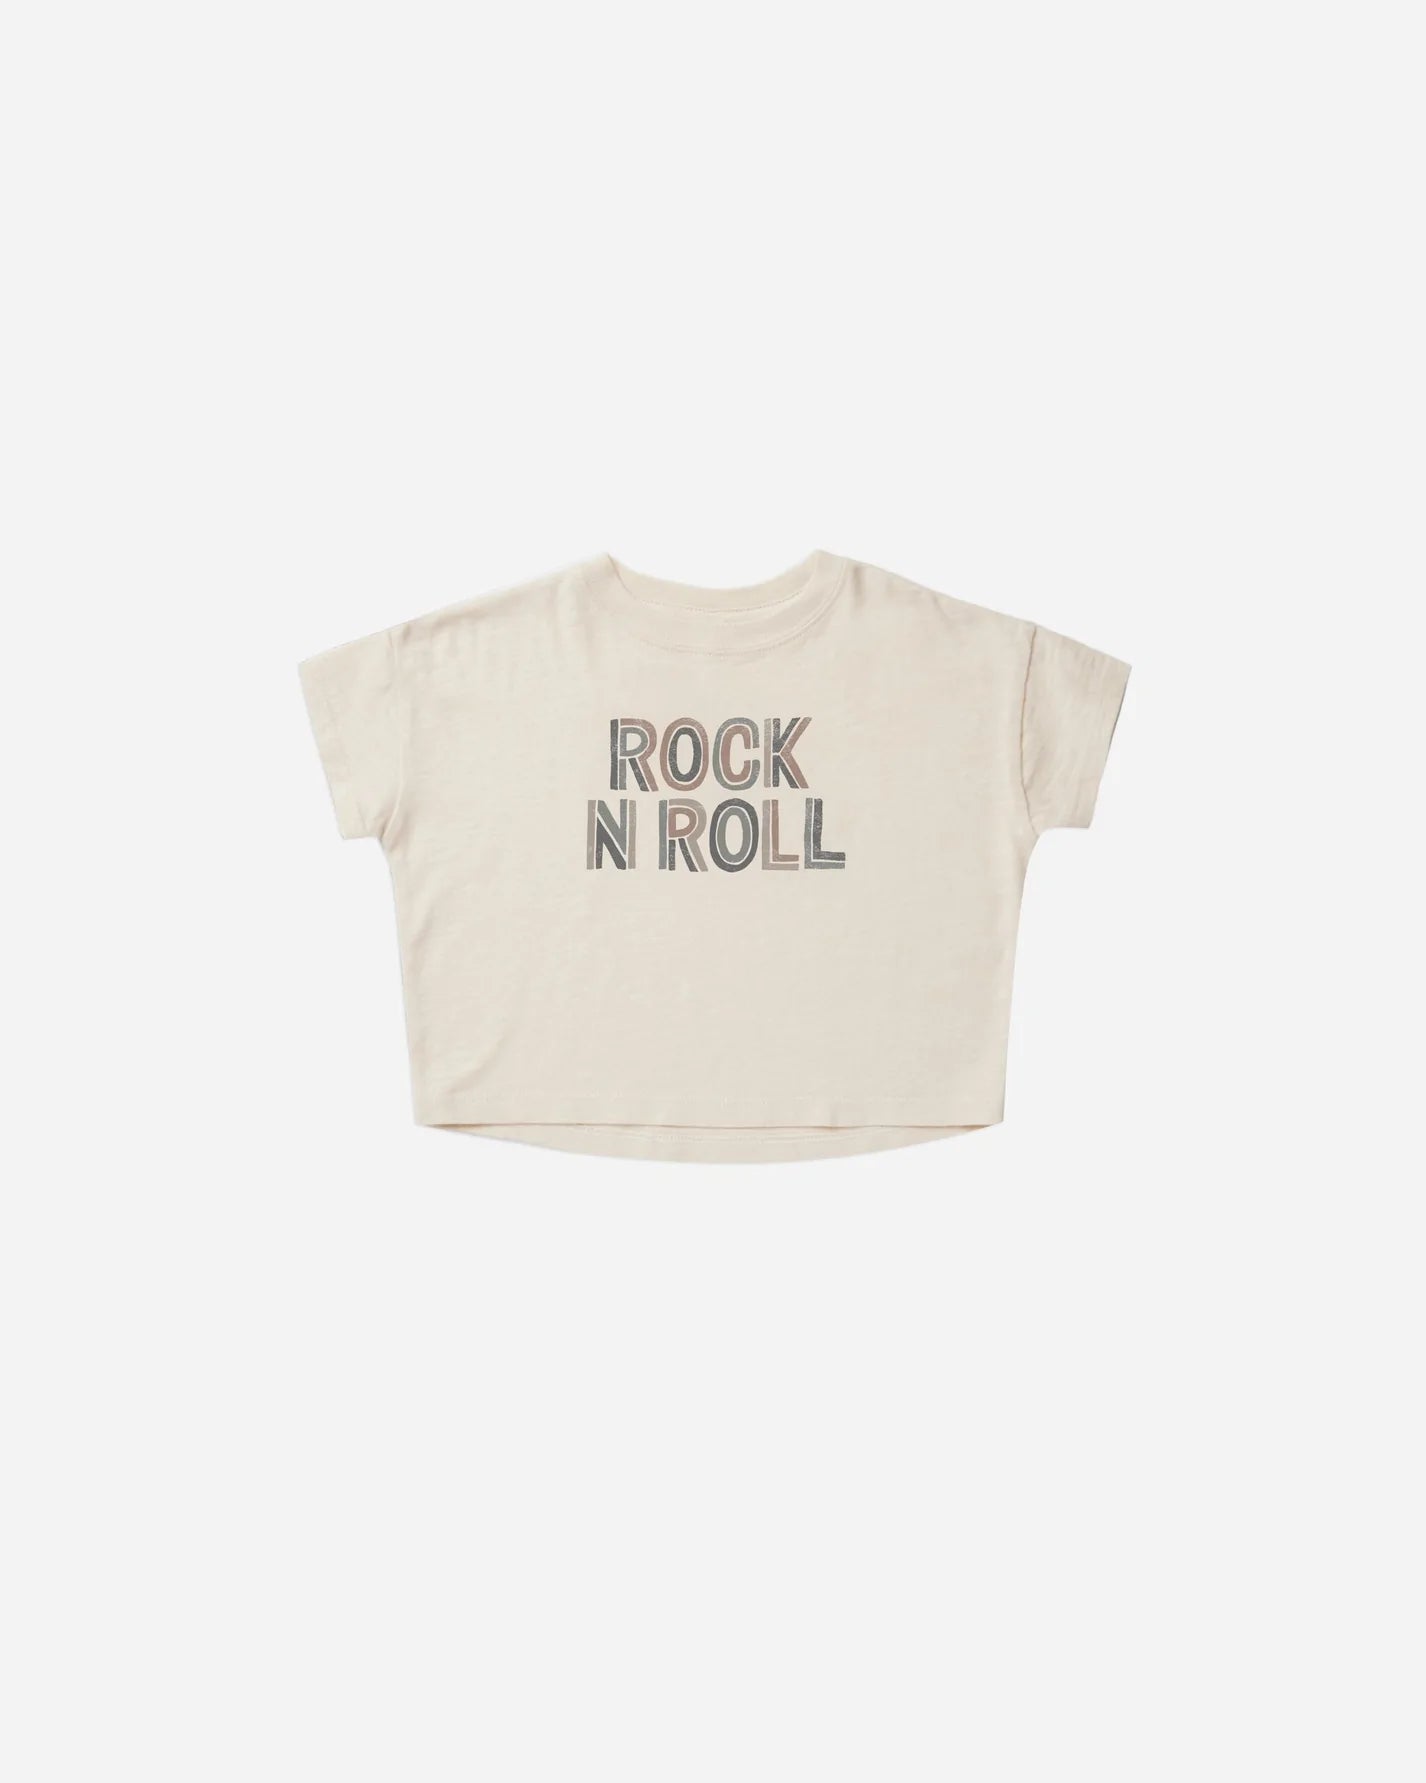 Boxy Tee in Rock N Roll  - Doodlebug's Children's Boutique